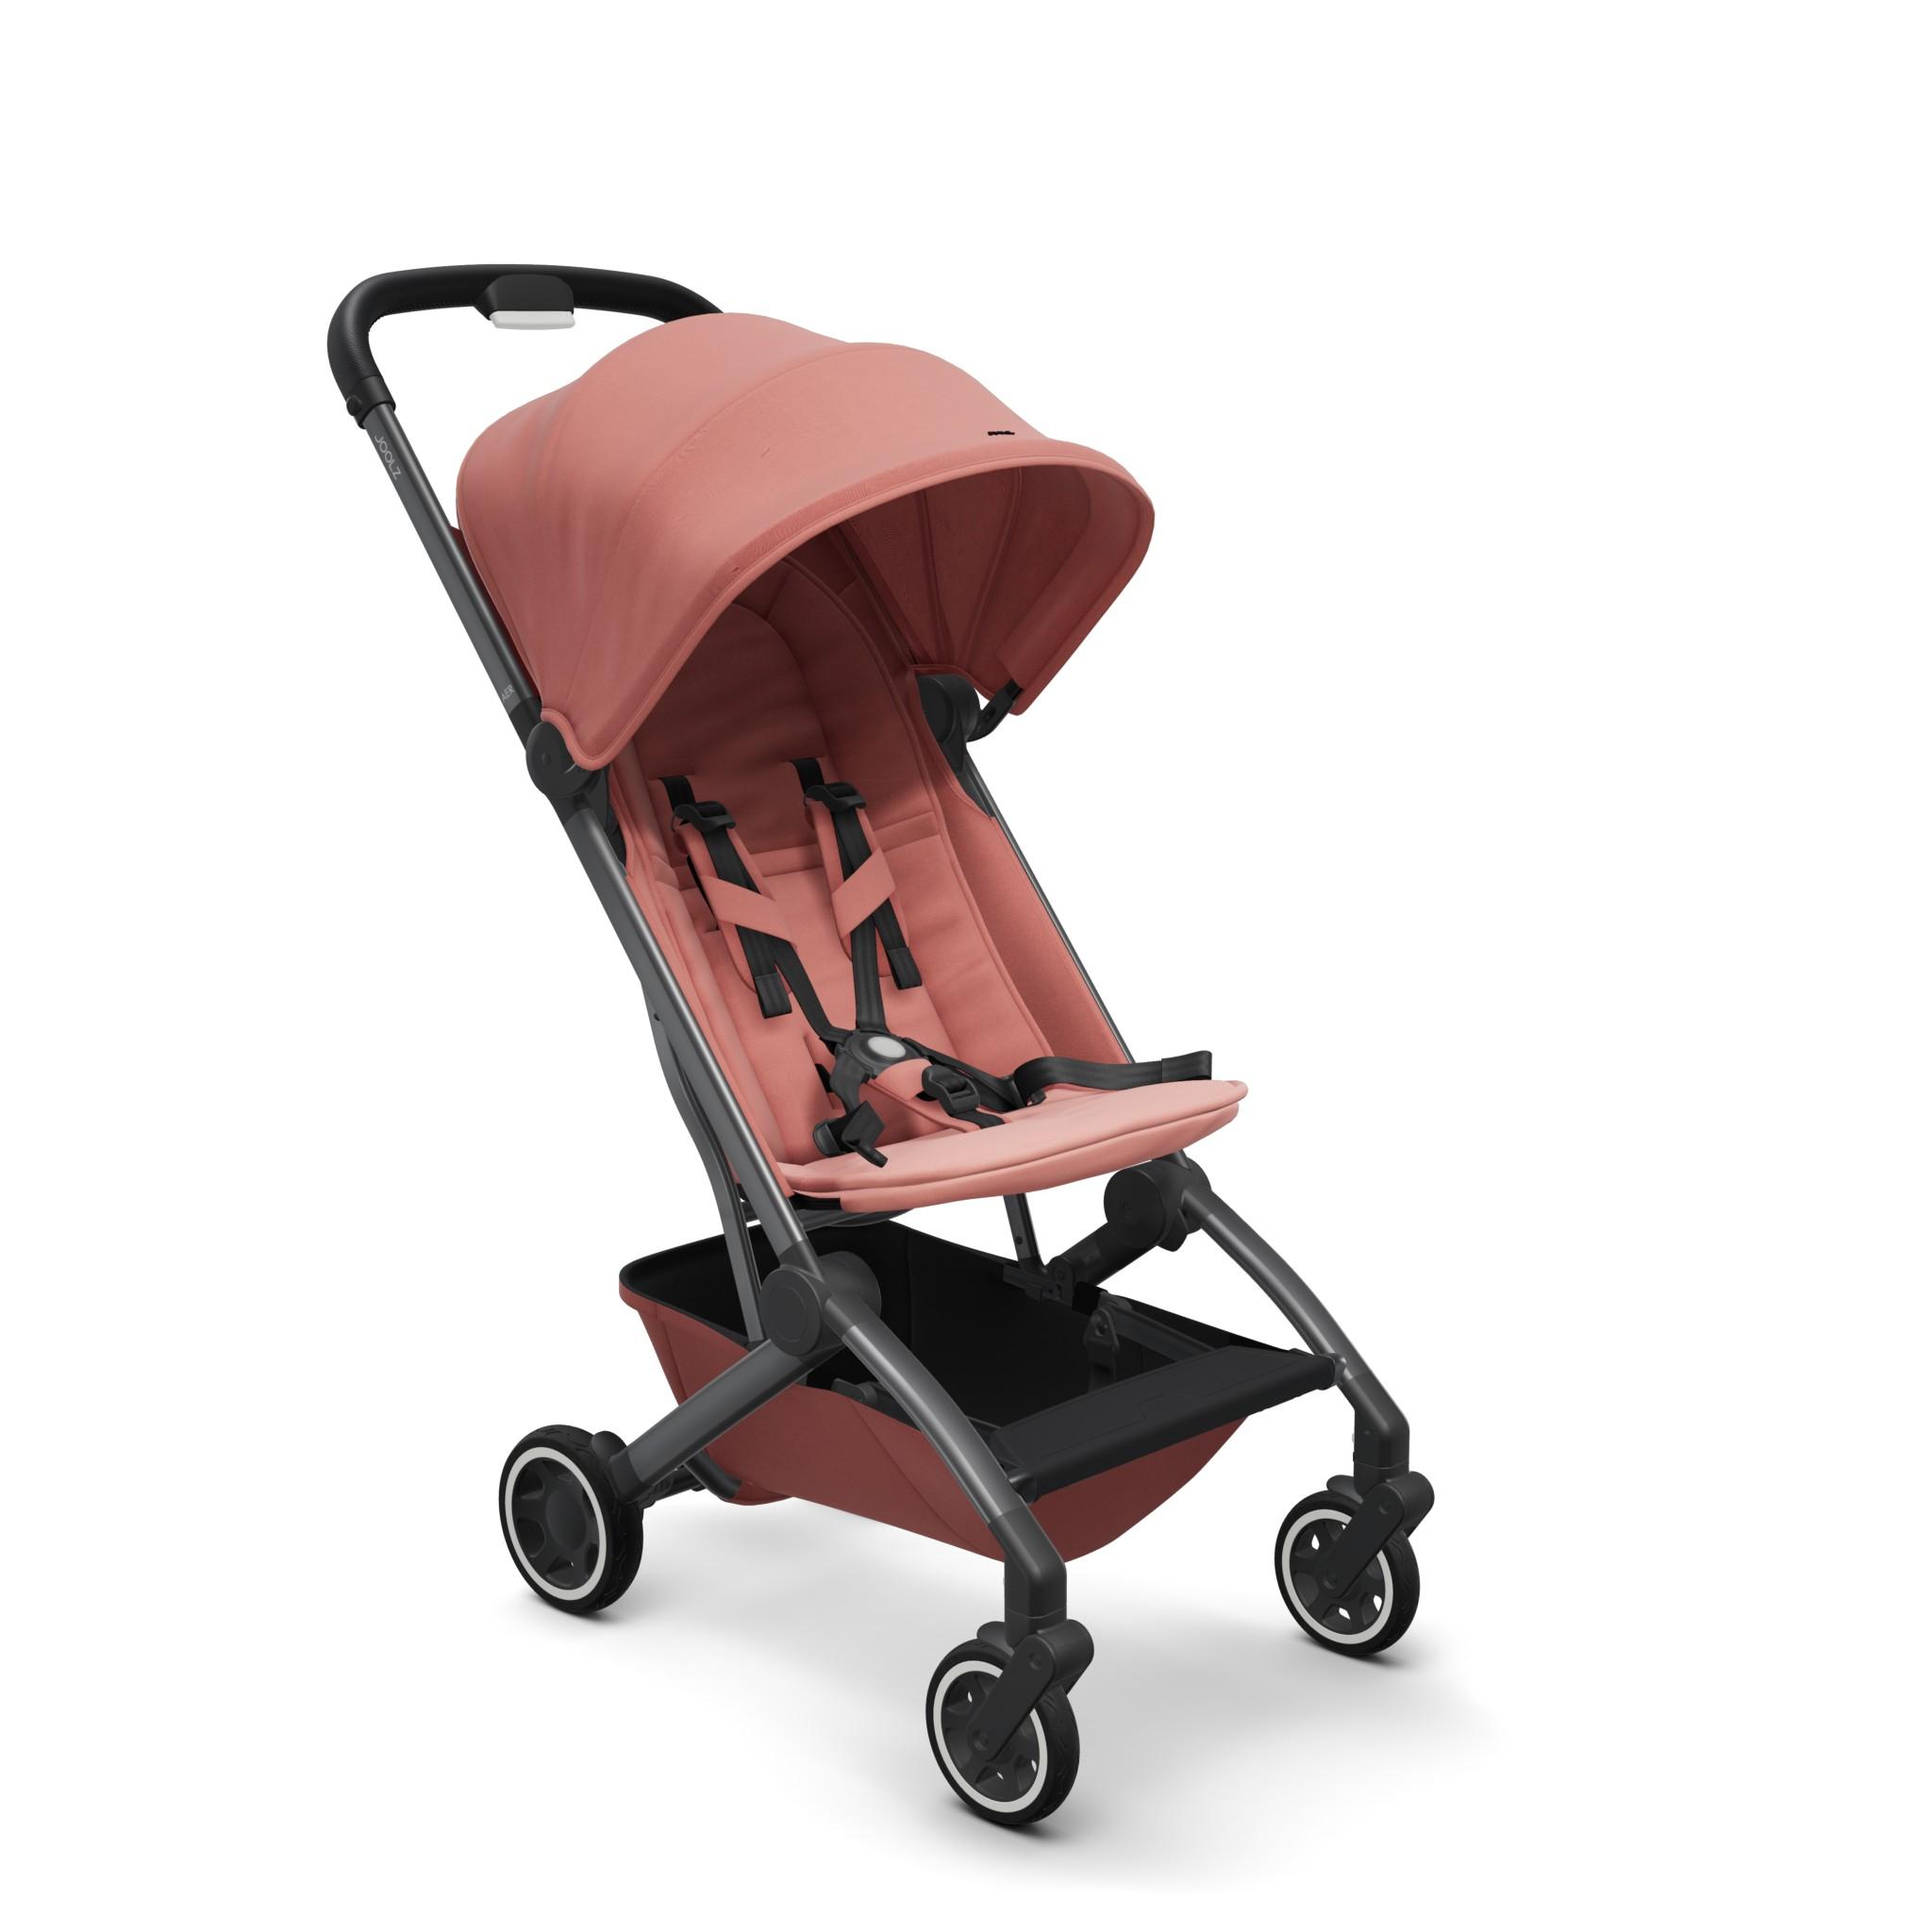 Joolz - Aer buggy absolute pink